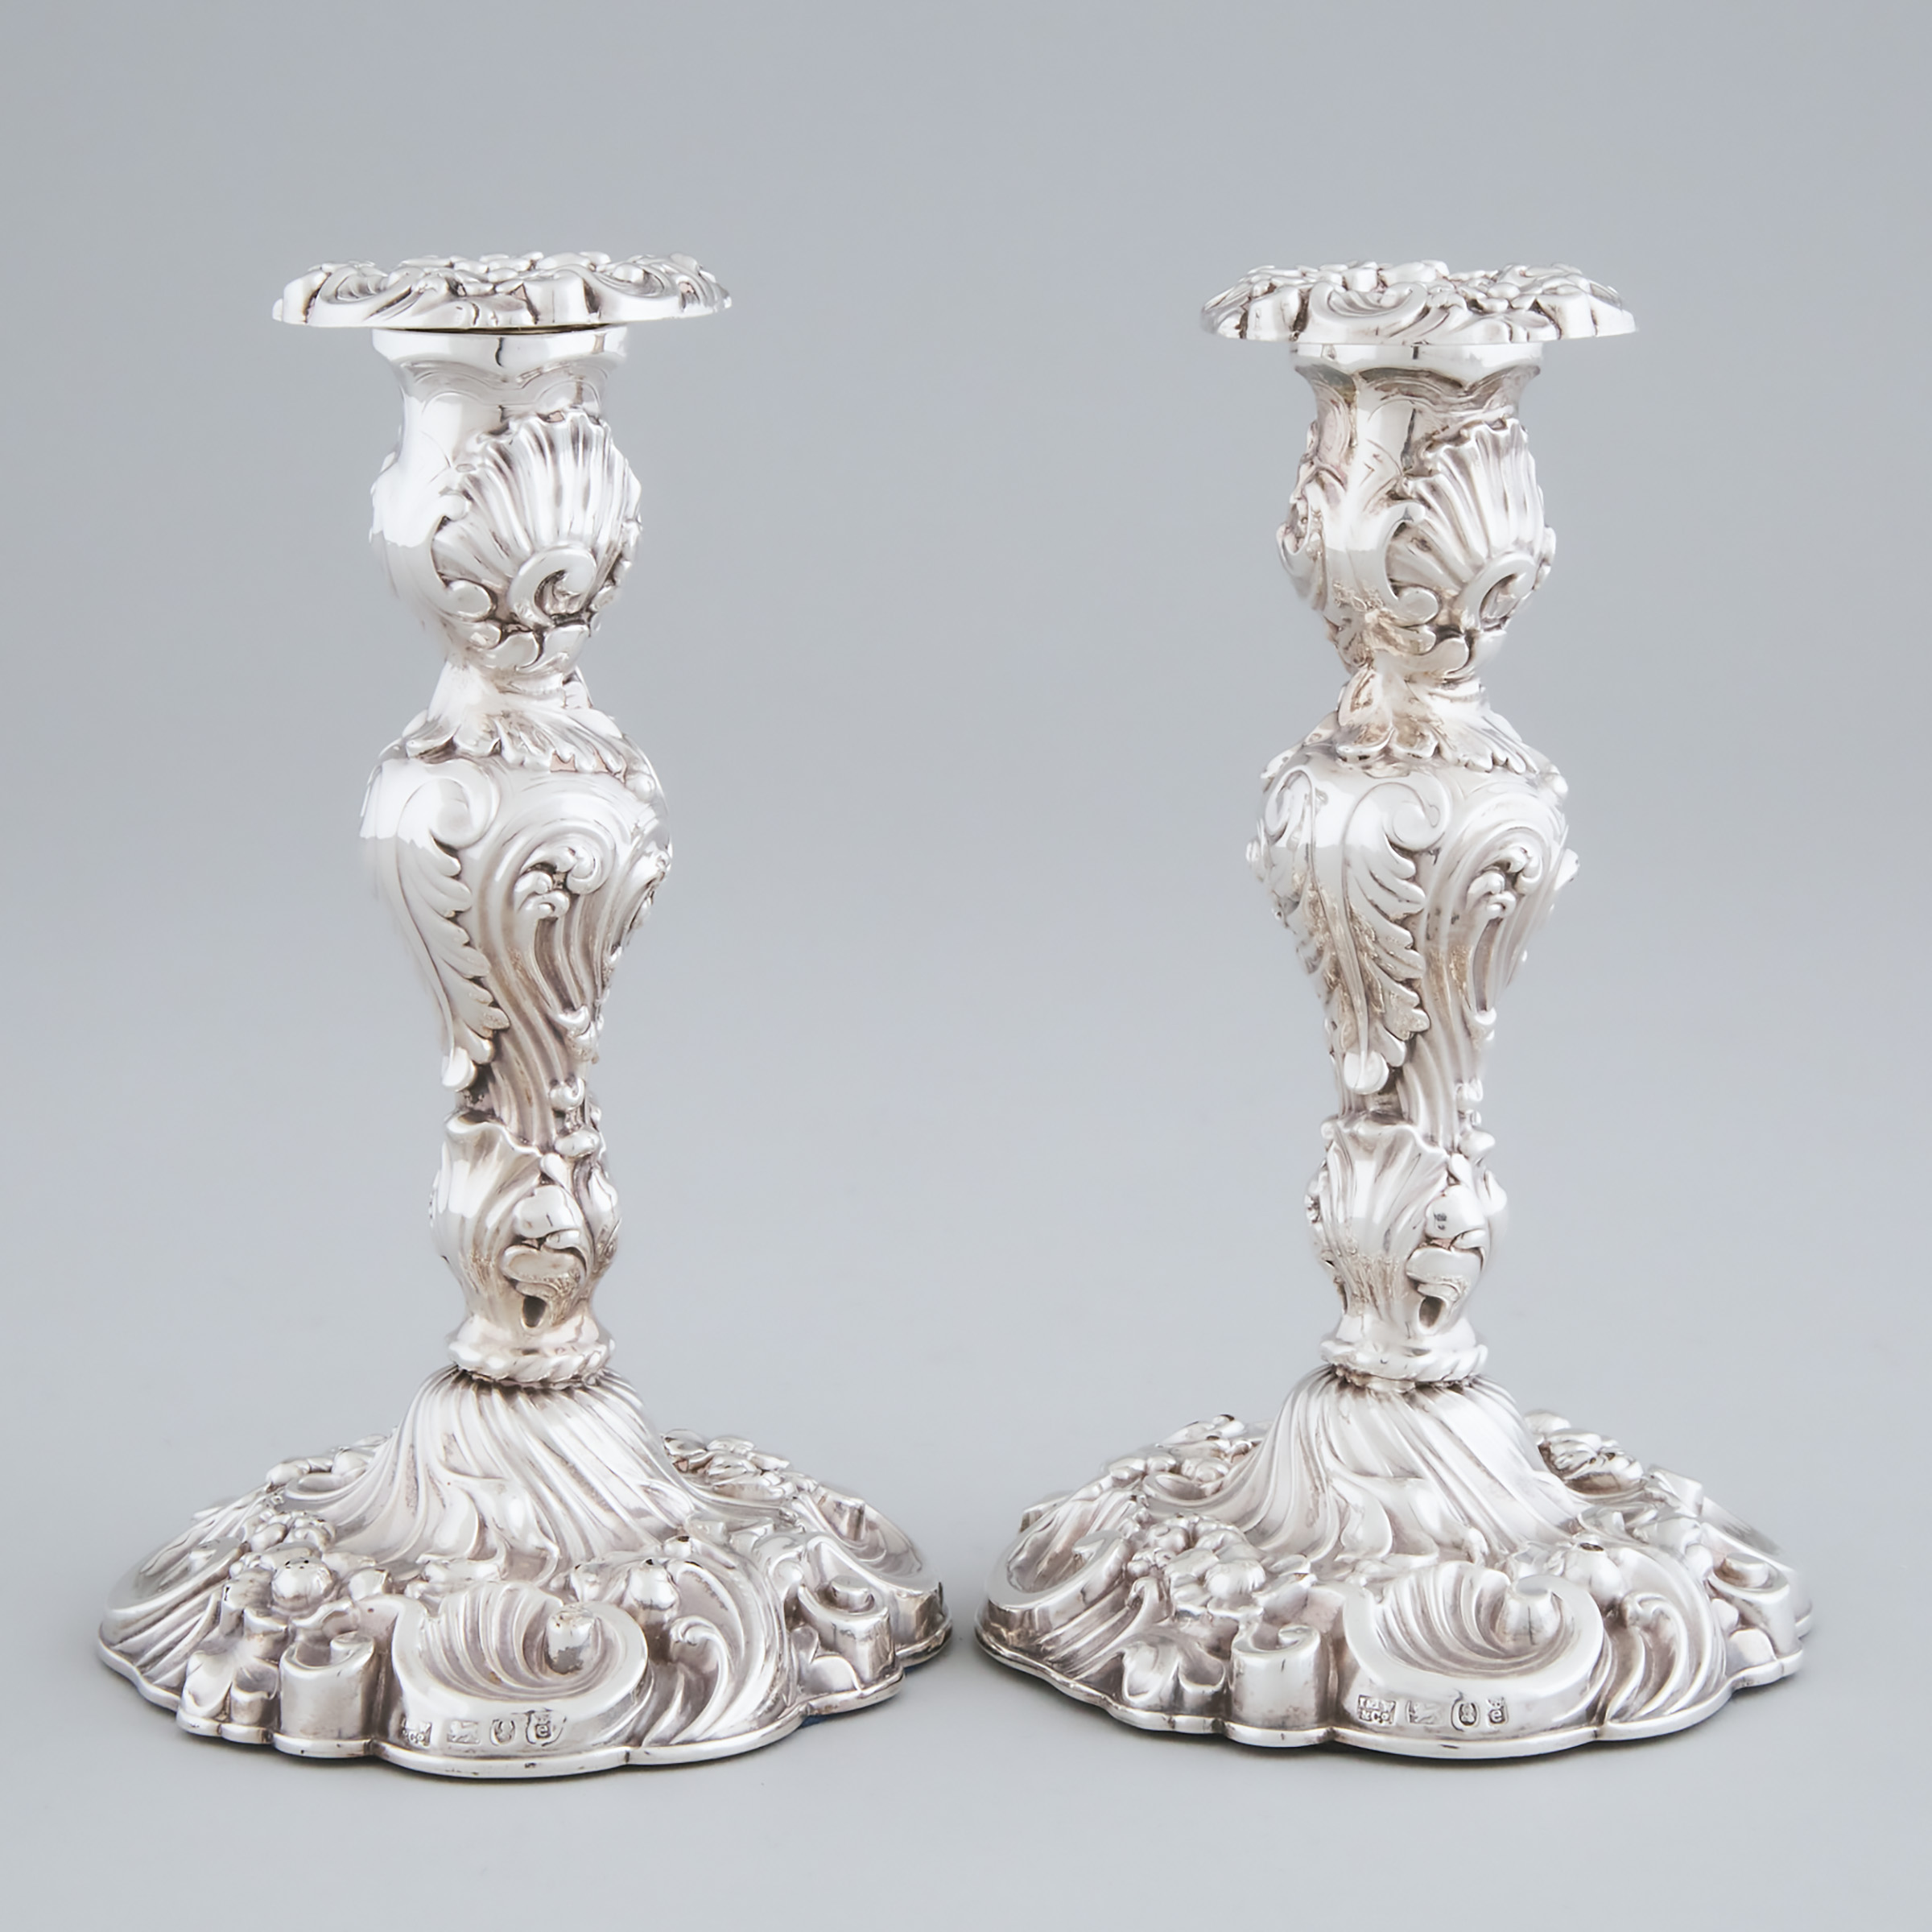 Pair of George IV Silver Candlesticks, Waterhouse, Hodson & Co., Sheffield, 1828